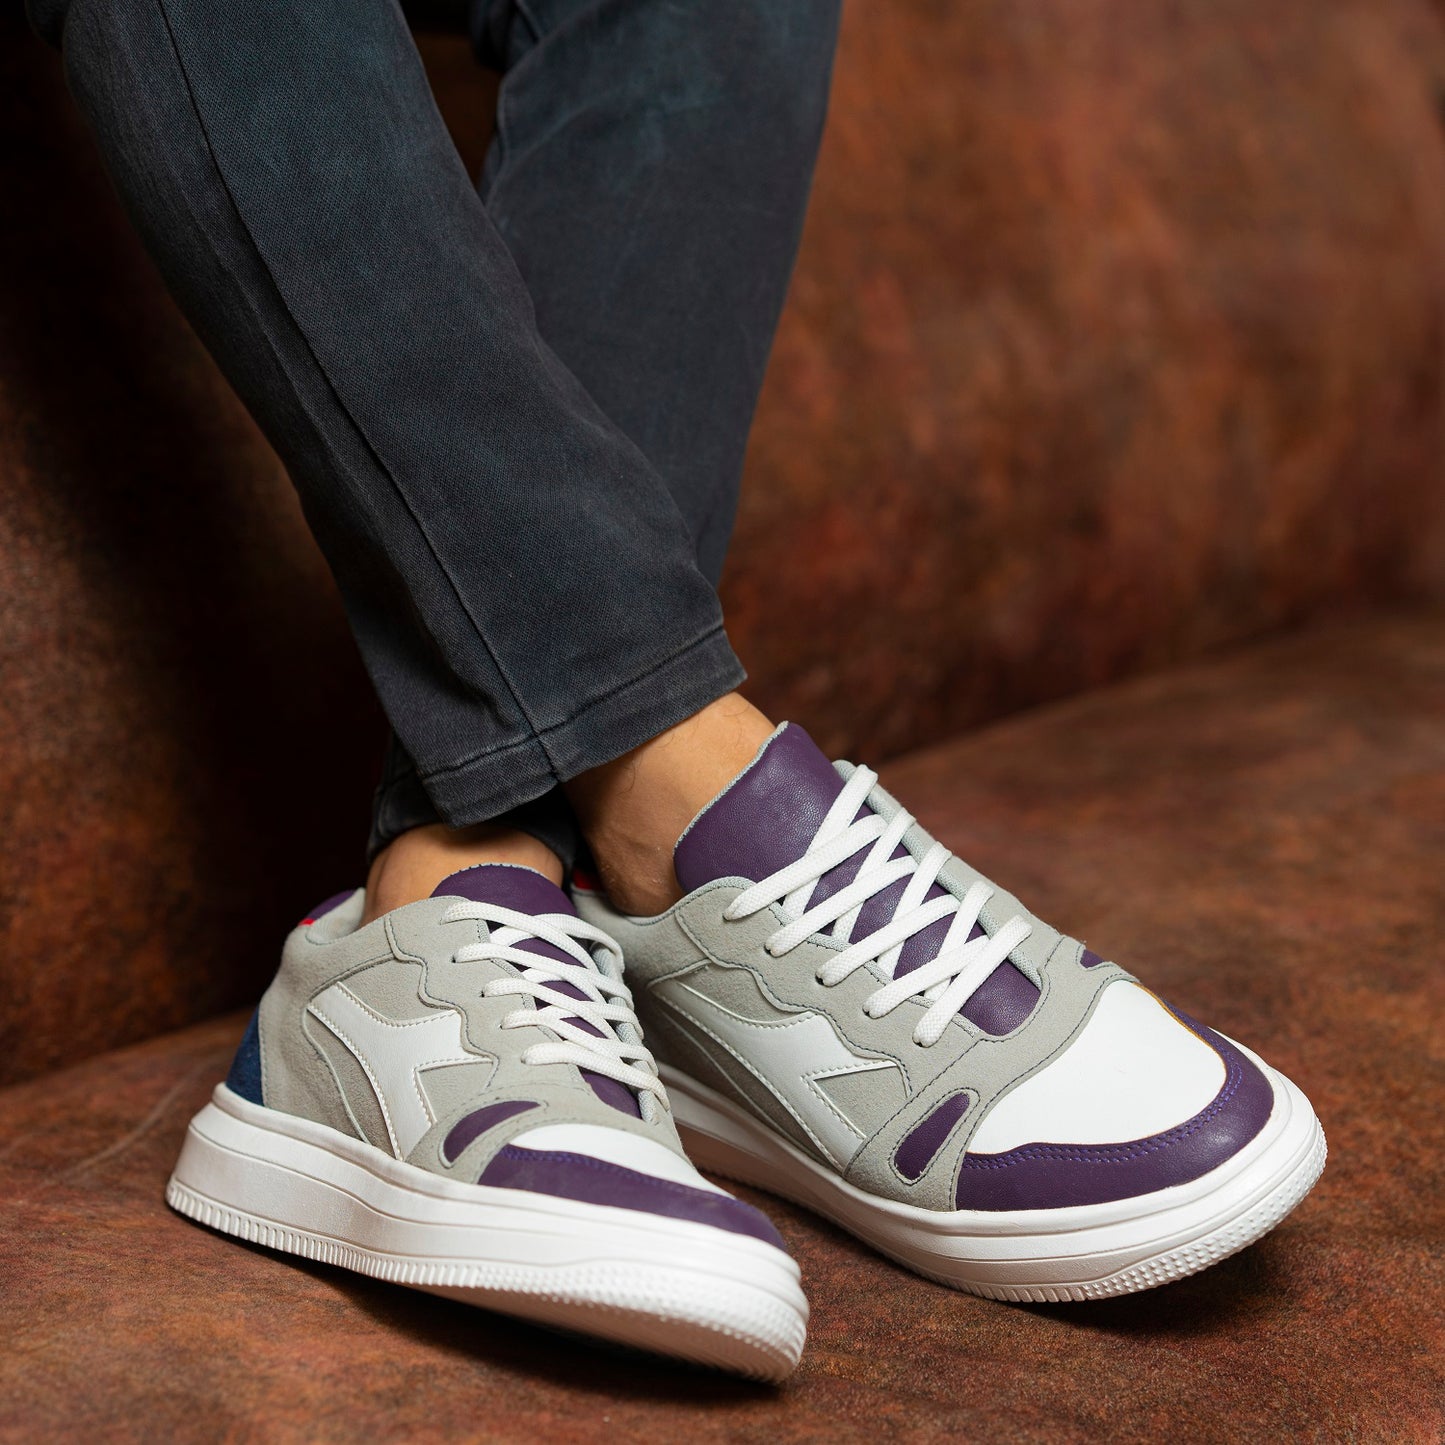 The Aurous Glide Laceup Sneakers